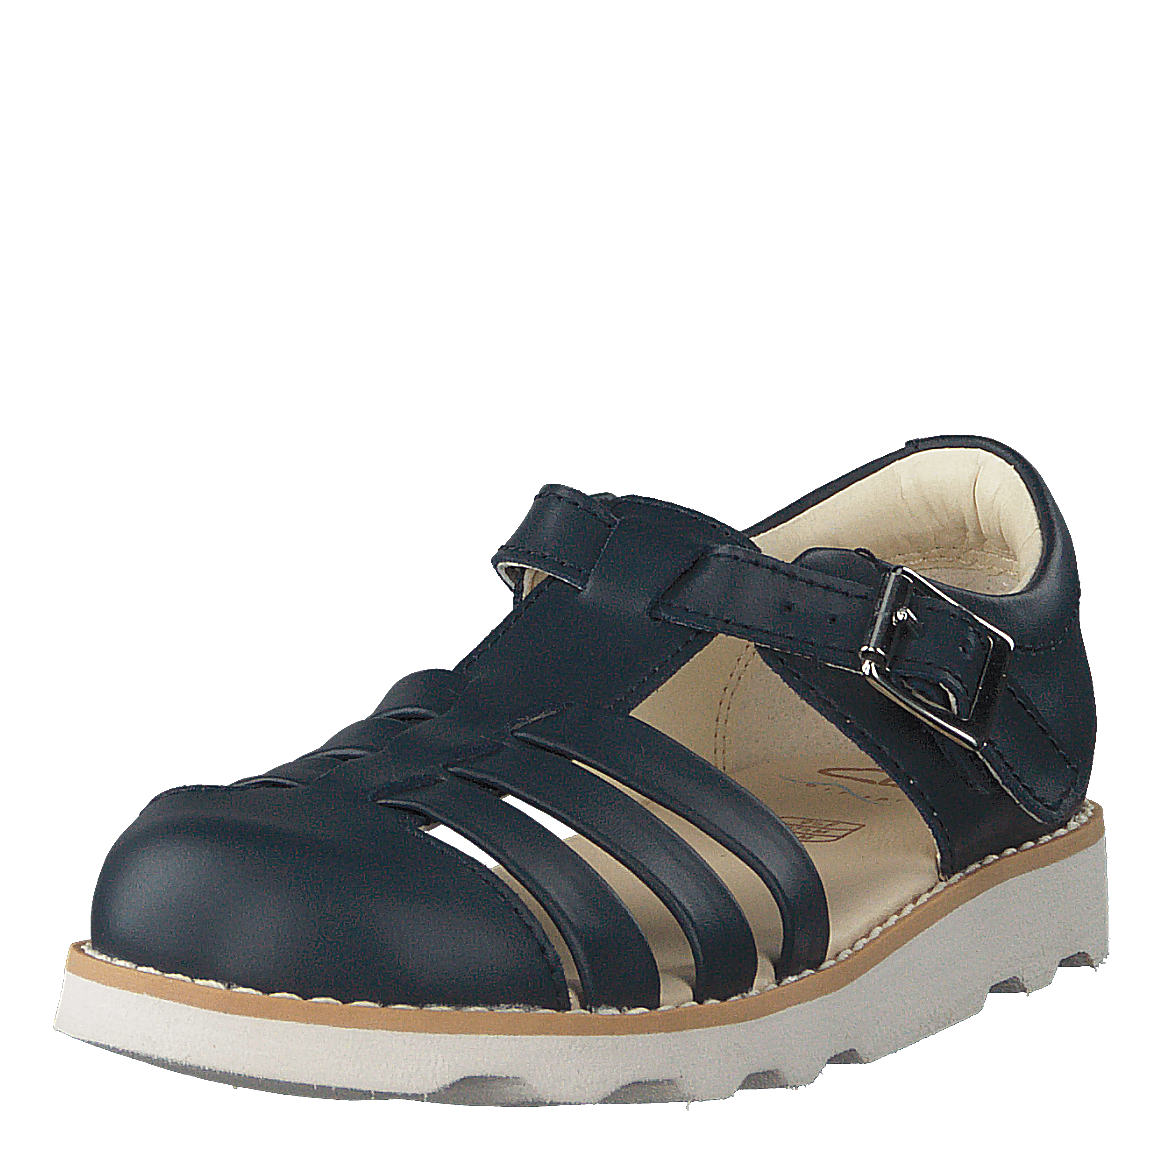 Crown Stem T Navy Leather